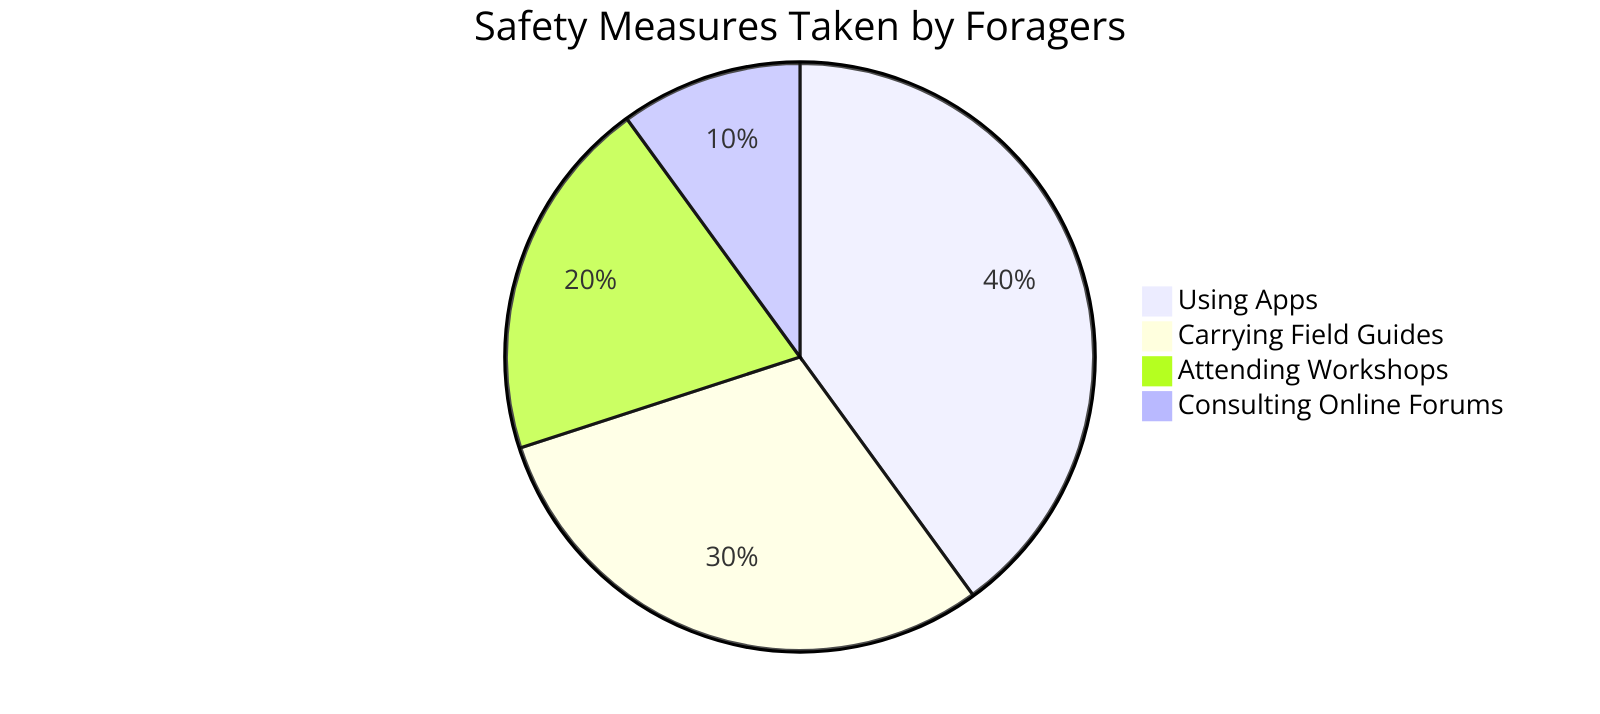  the percentage of foragers who take various safety measures to show the most common practices